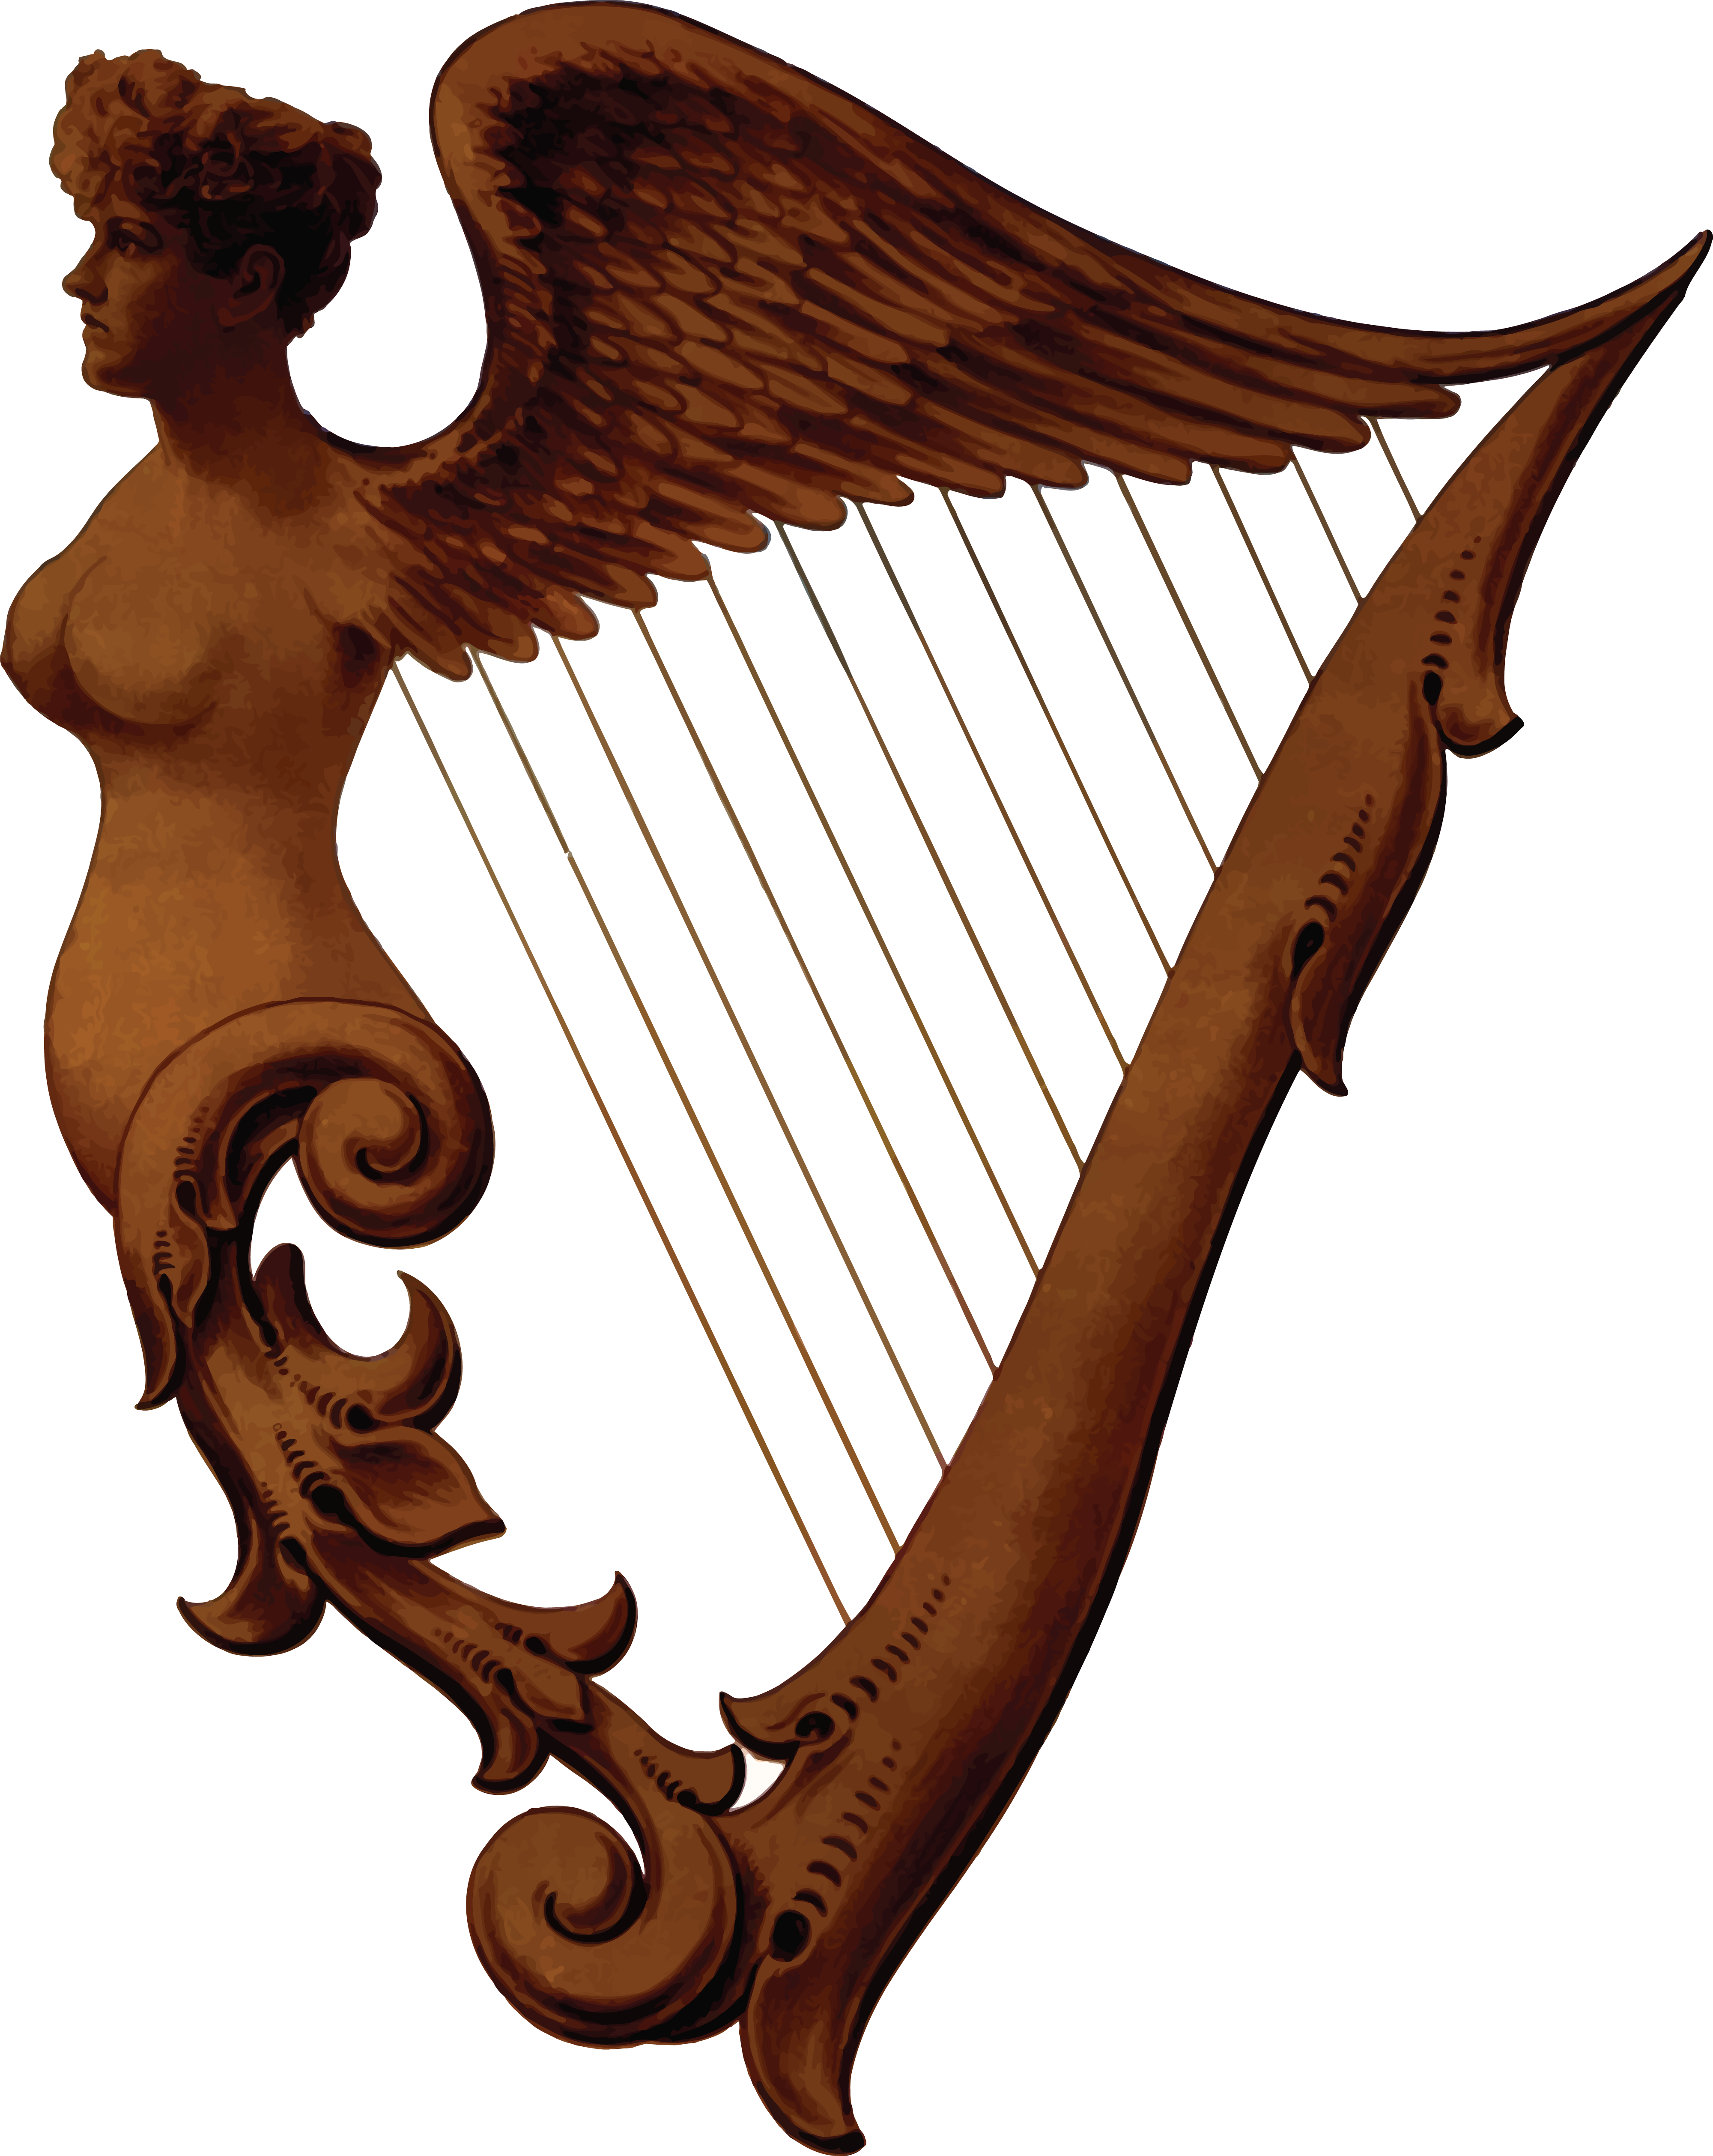 A Statue Of A Woman With Wings And A Harp